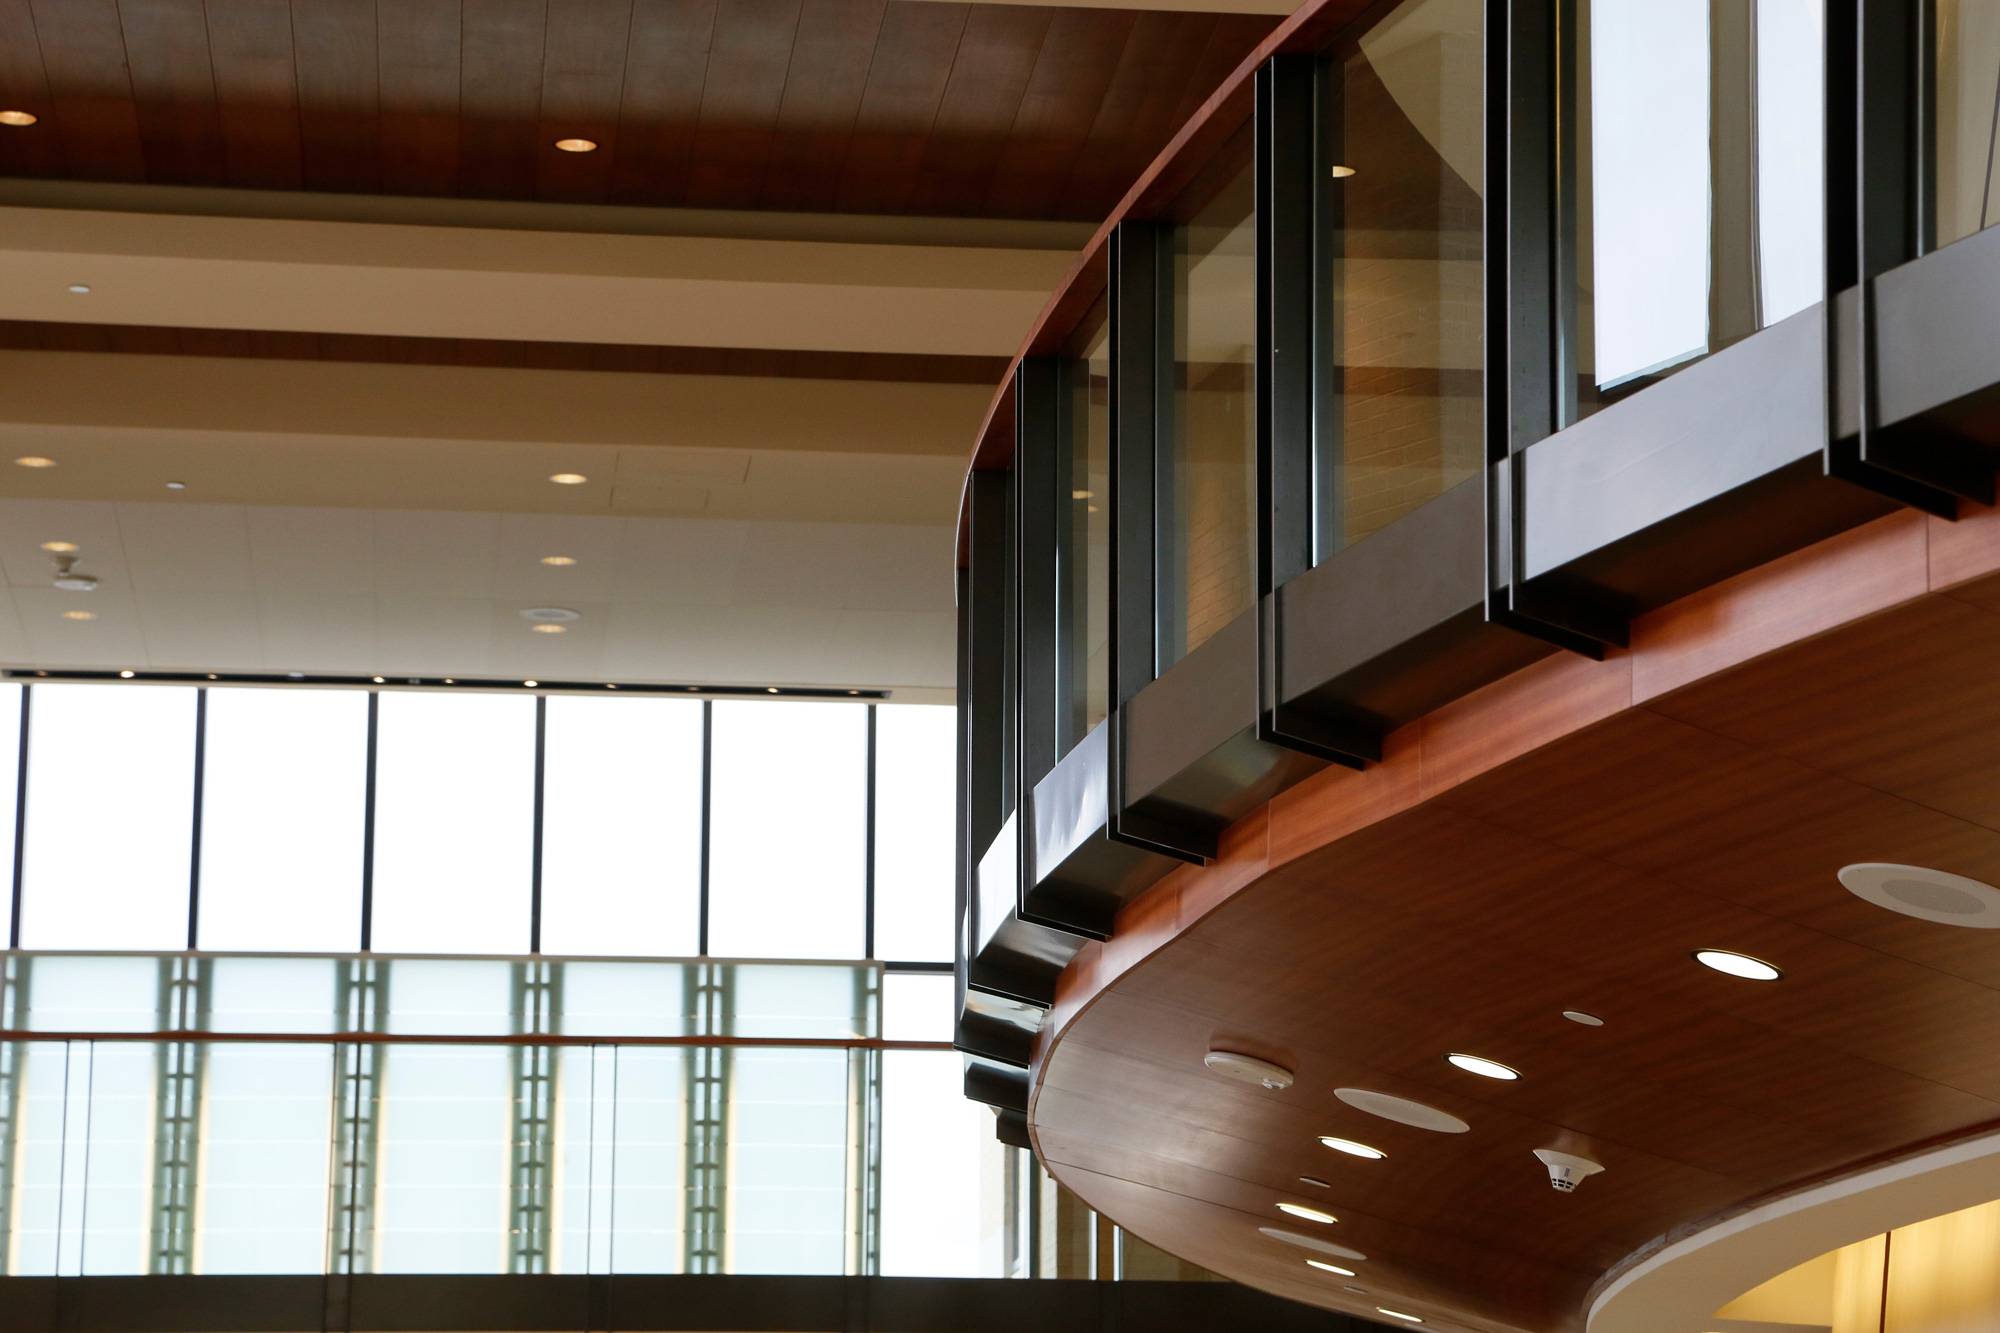 A balcony in the Performing Arts Center lobby at Texas State University